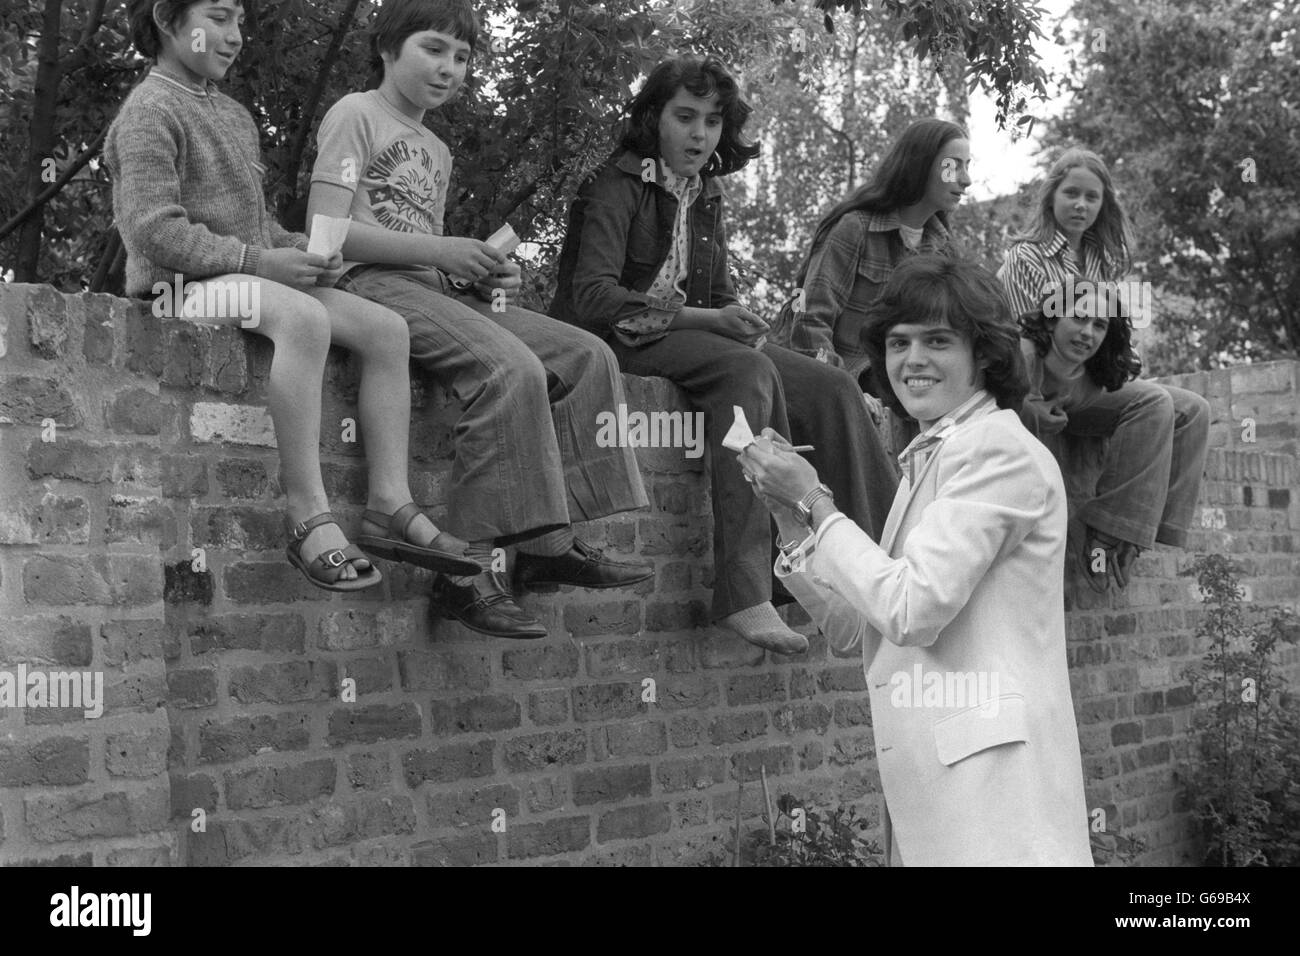 Fans of the Osmond Brothers' pop group, who gate-crashed a garden party held in honour of the group at the Richmond Fellowship in Addison Road, London, were rewarded with autographs from Donny Osmond. Stock Photo